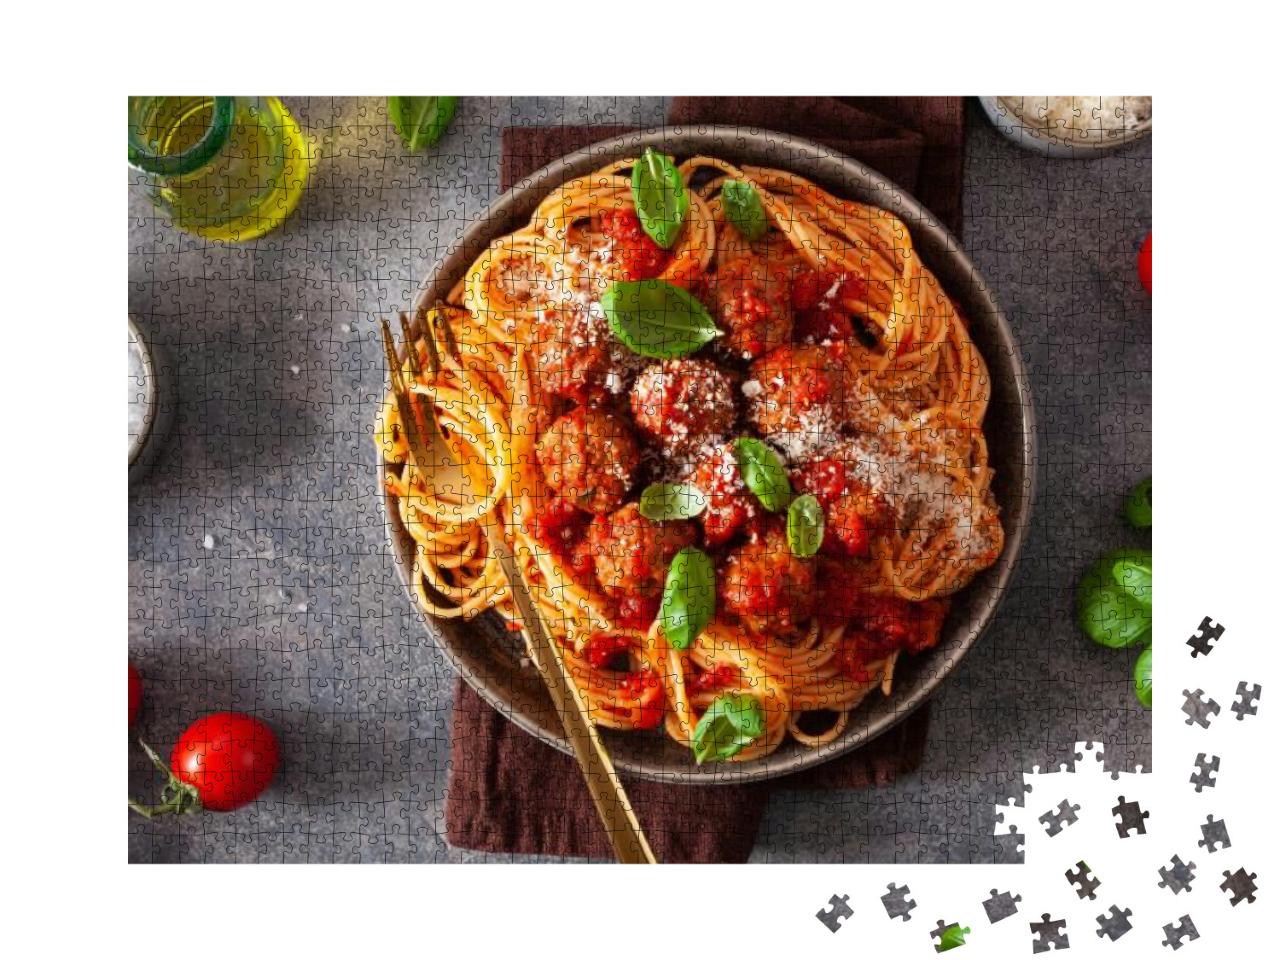 Spaghetti with Meatballs & Tomato Sauce, Italian Pasta... Jigsaw Puzzle with 1000 pieces